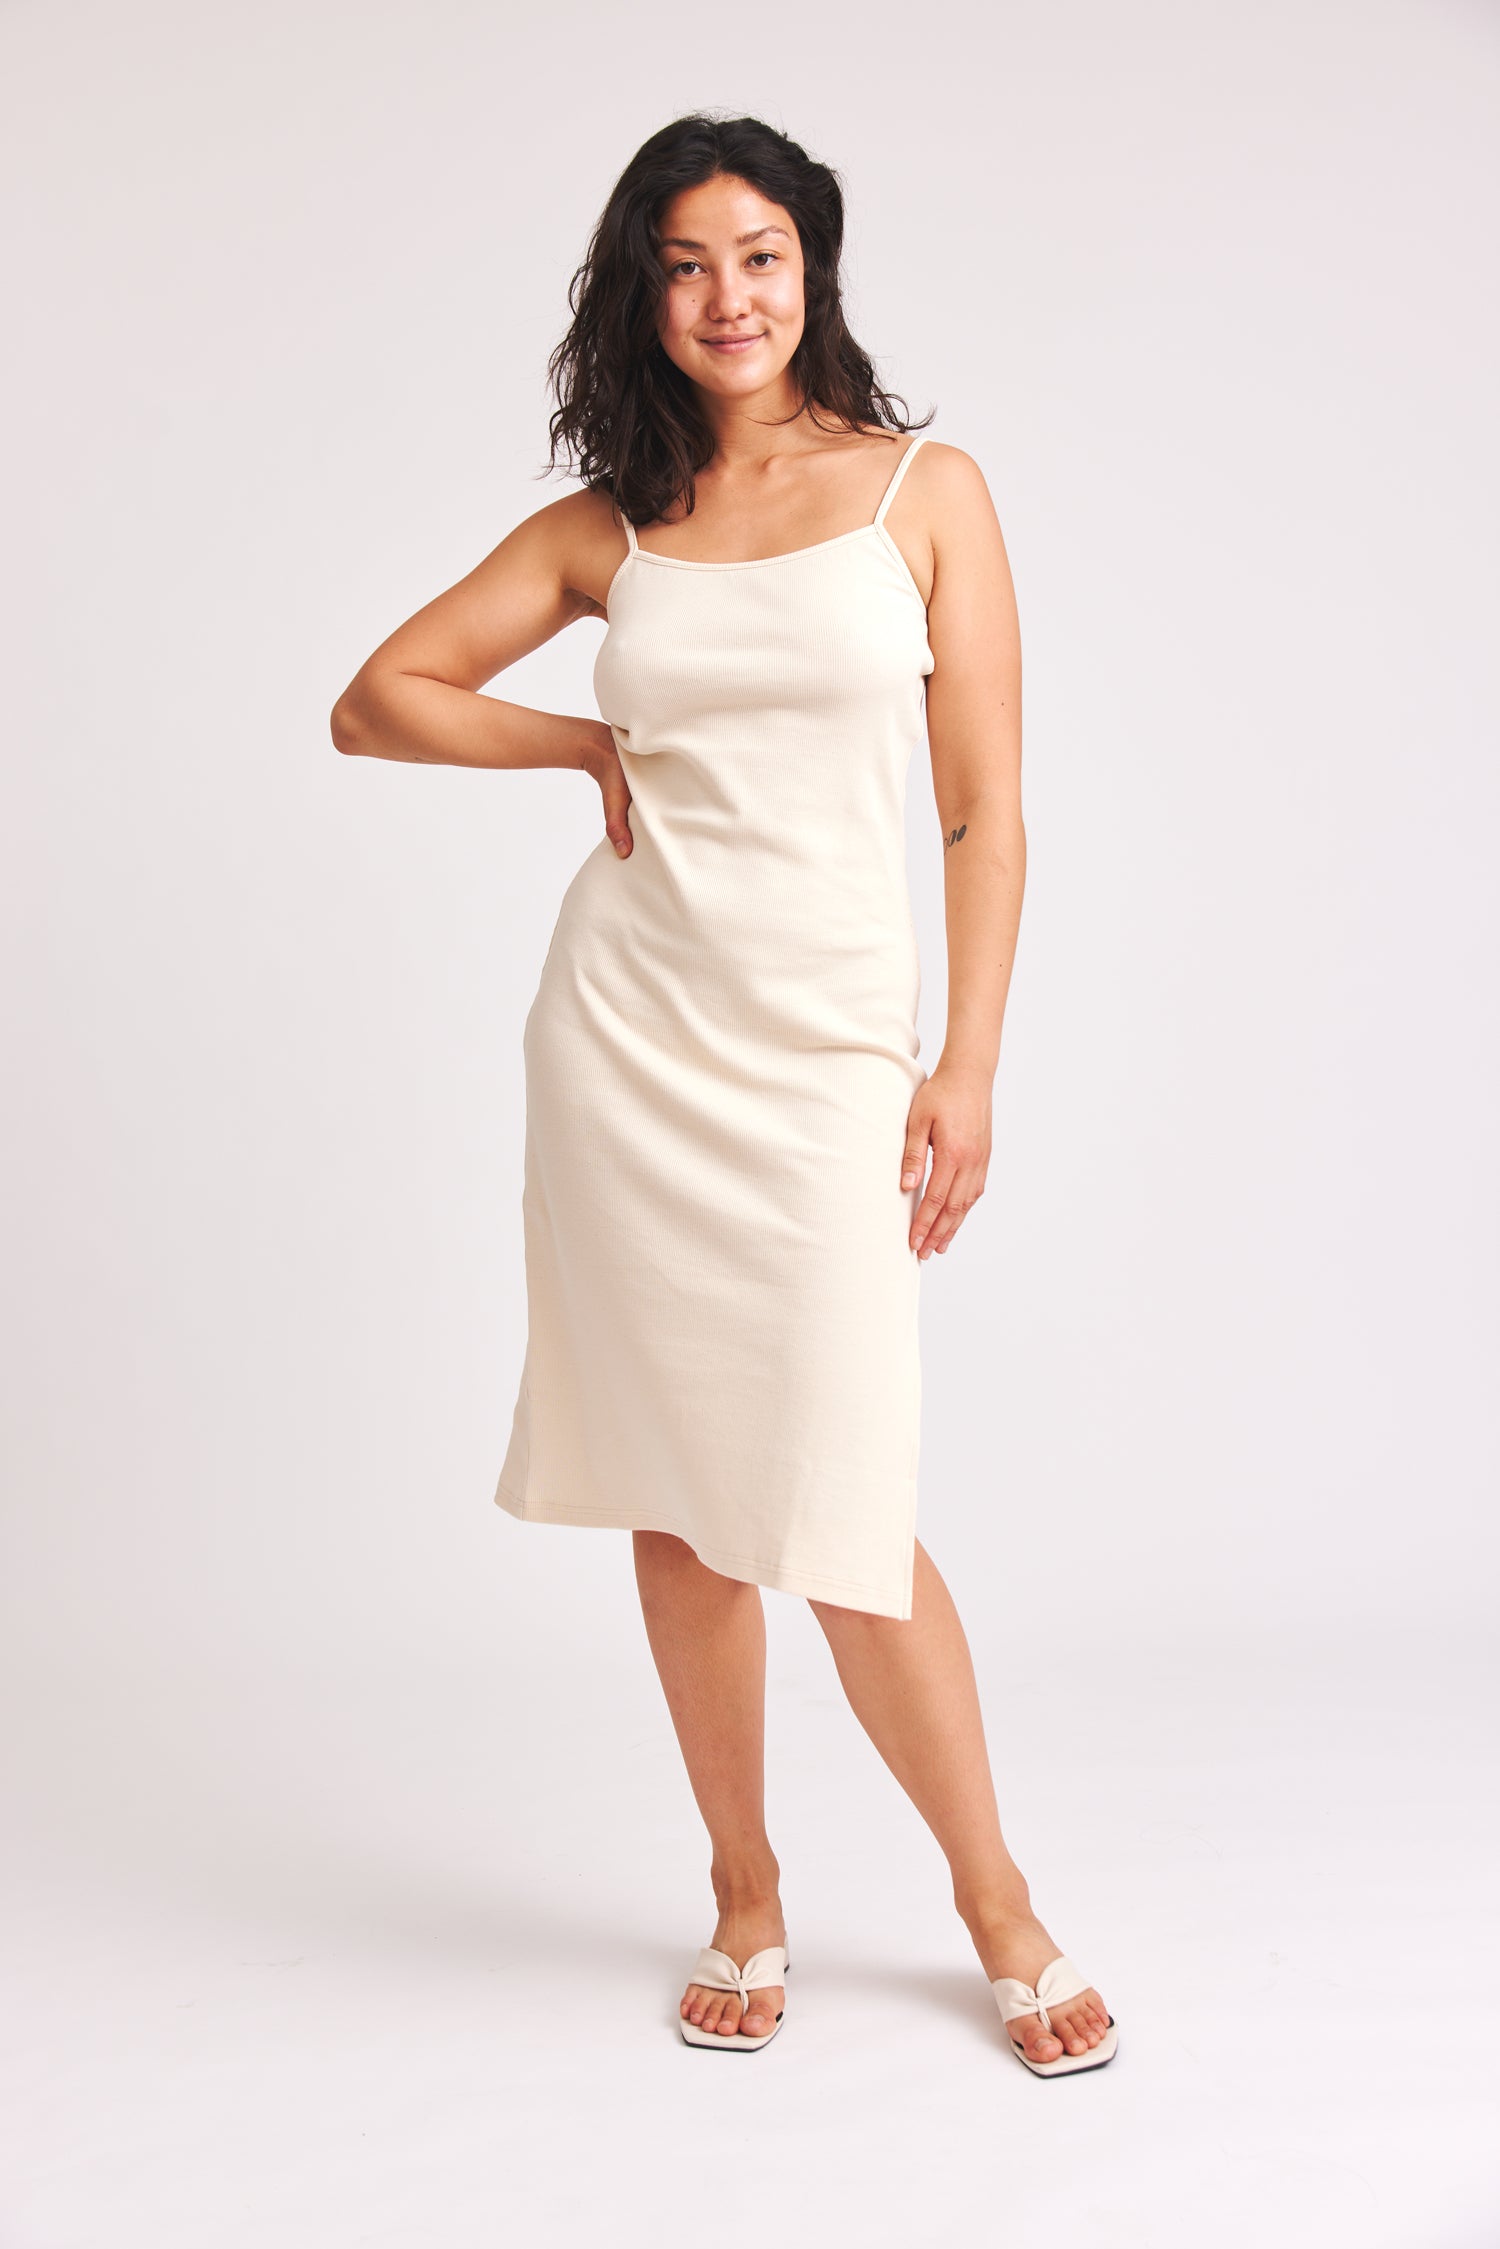 Natural colored Bonnie dress made of organic cotton by Baige the Label